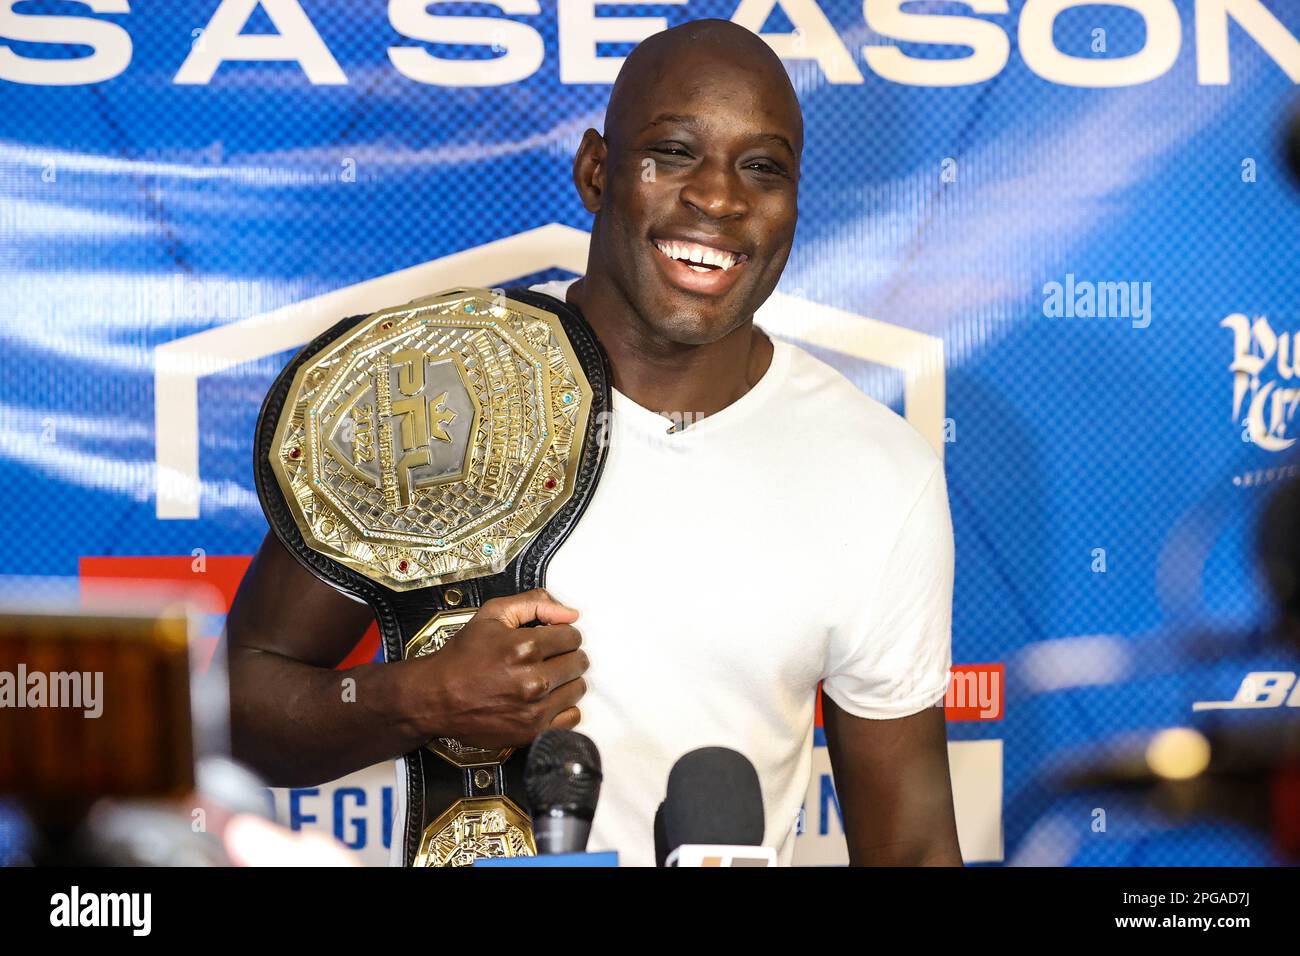 March 21, 2023: 2022 PFL Welterweight Champion Sadibou Sy speaks to media during the 2023 PFL Regular Season Media Day at Xtreme Couture MMA in Las Vegas, NV. Christopher Trim/CSM. Stock Photo